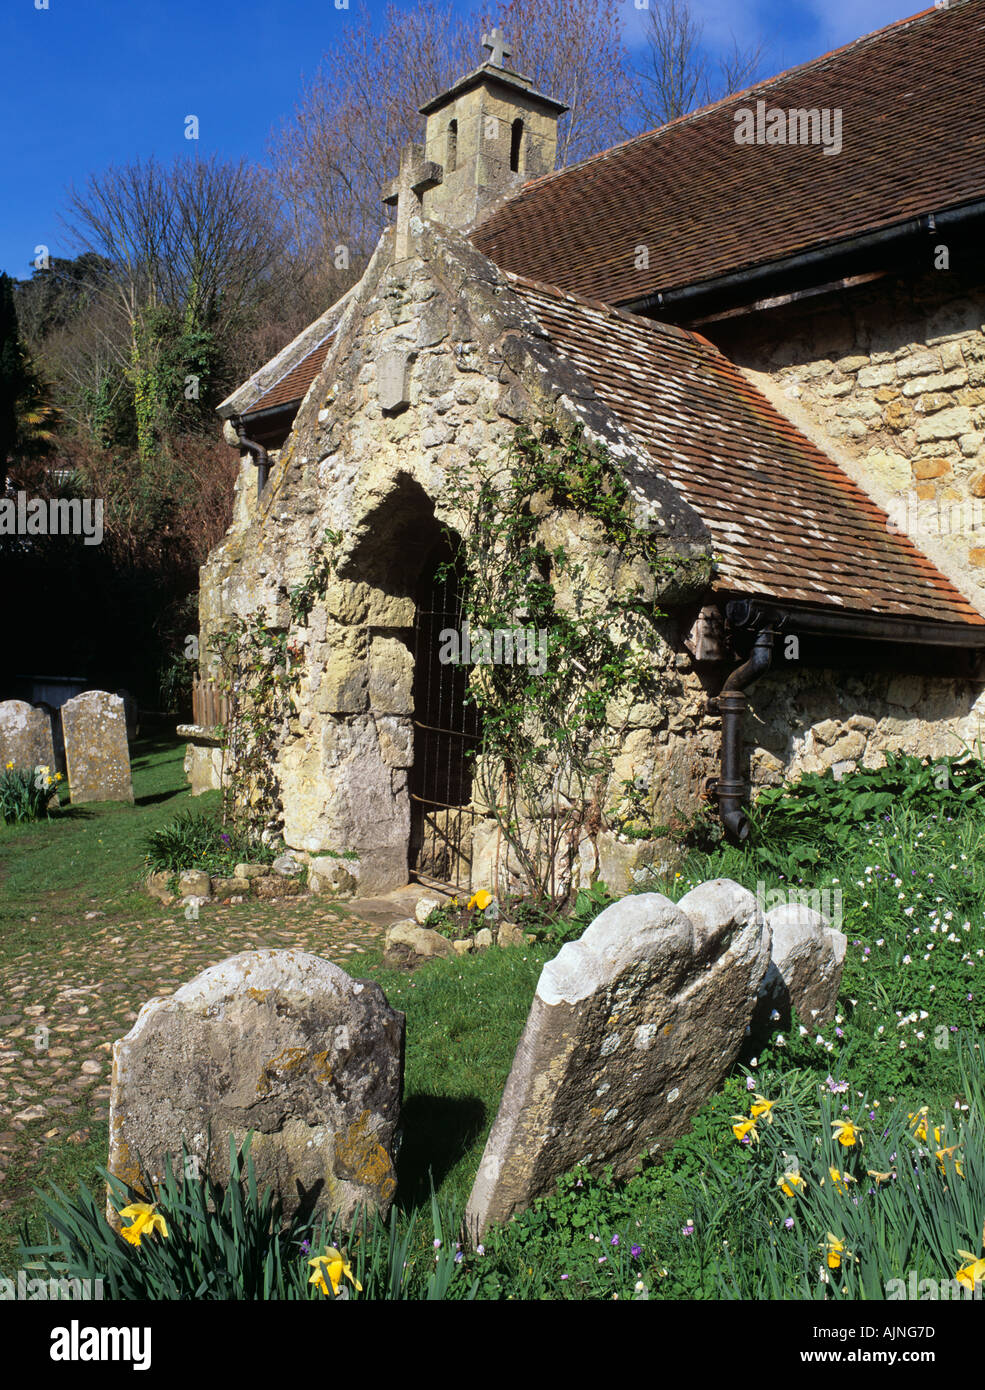 ST BONIFACE OLD CHURCH in SPRING. Bonchurch, Isle of Wight, England, UK, Britain Stock Photo